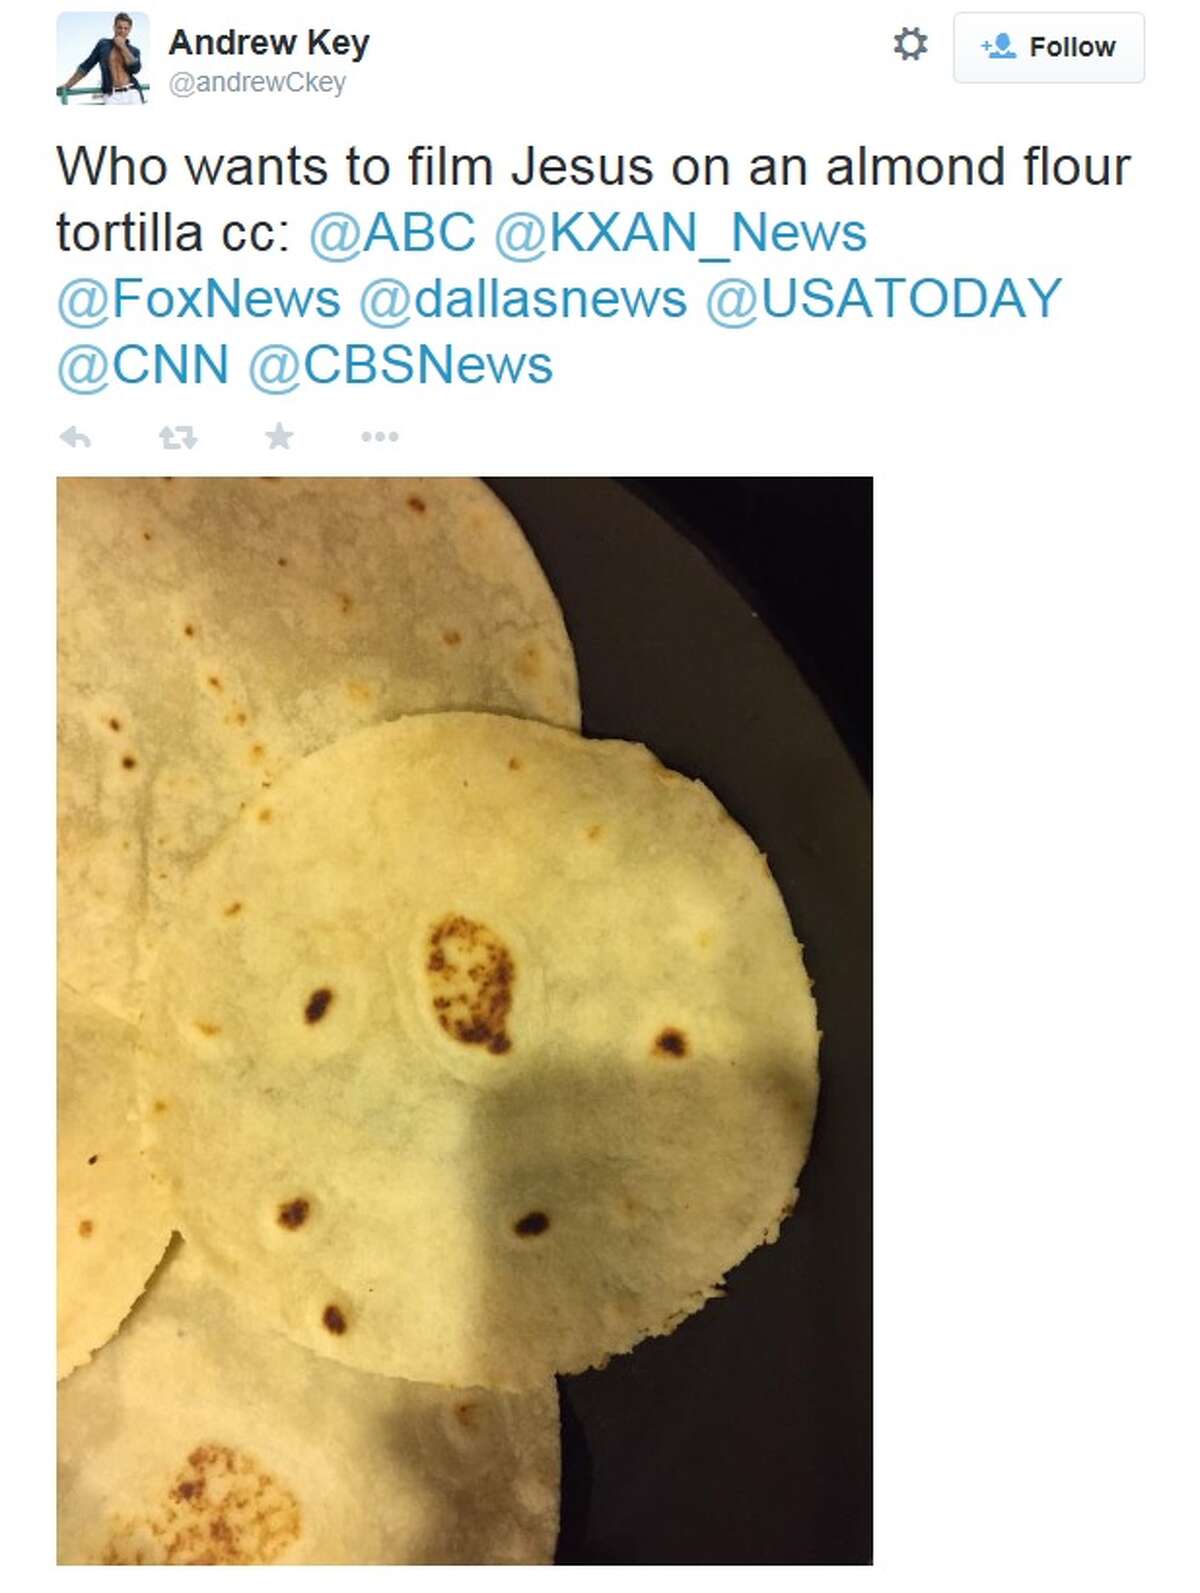 Andrew Key tweeted this photo Wednesday of a tortilla with a burn mark that resembles Jesus Christ.